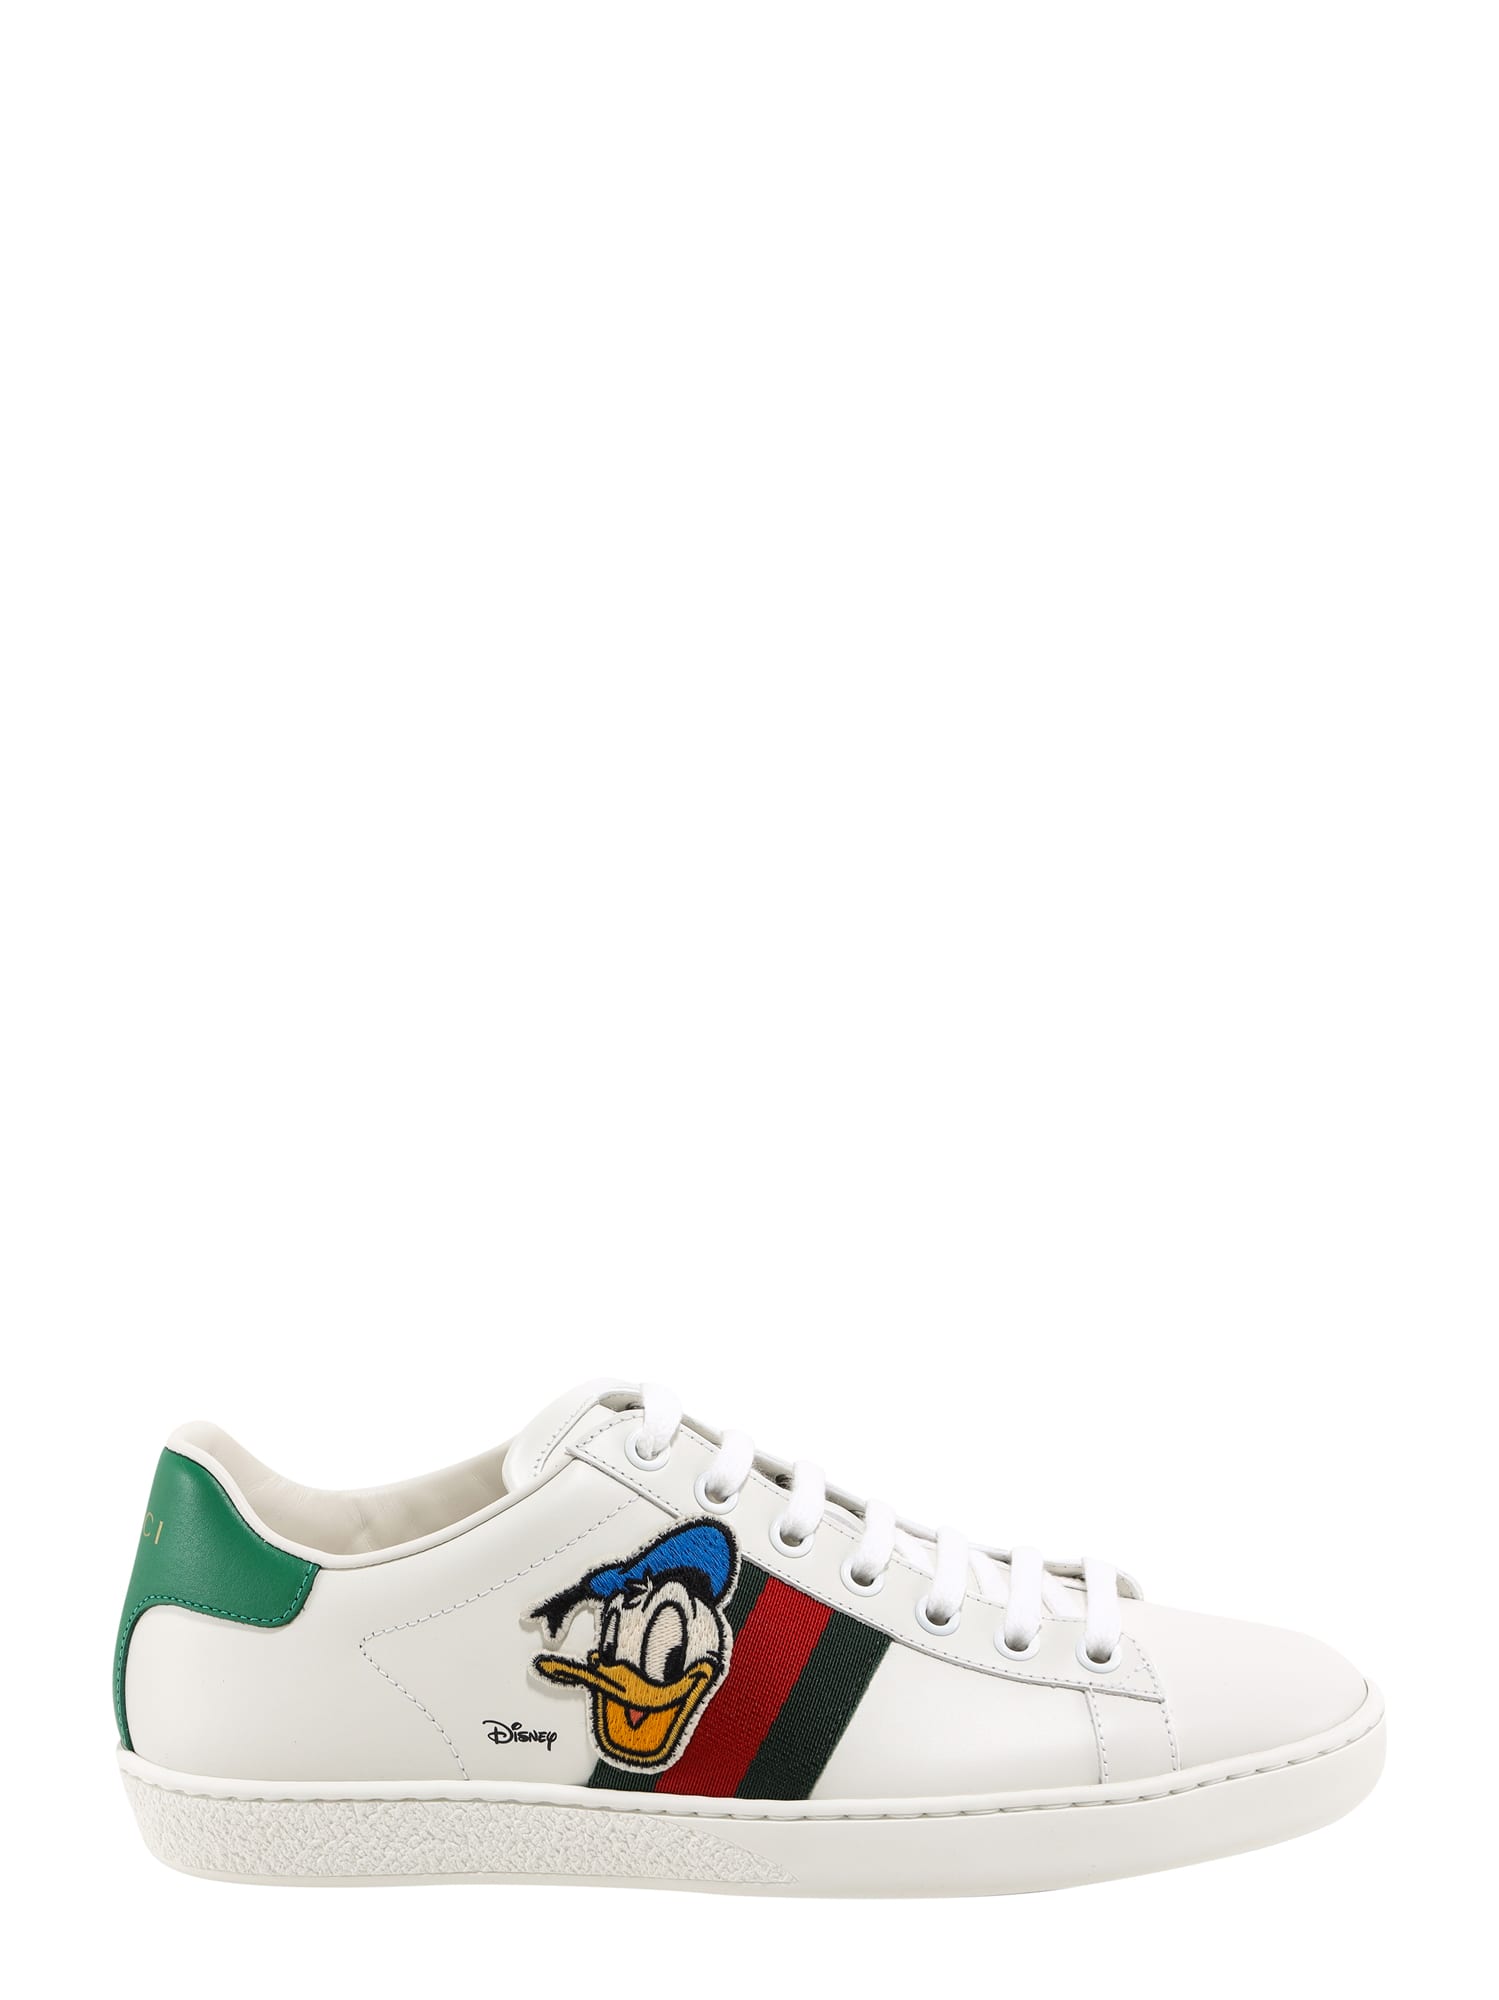 Buy Gucci Donald Duck Disney X Gucci Sneakers online, shop Gucci shoes with free shipping